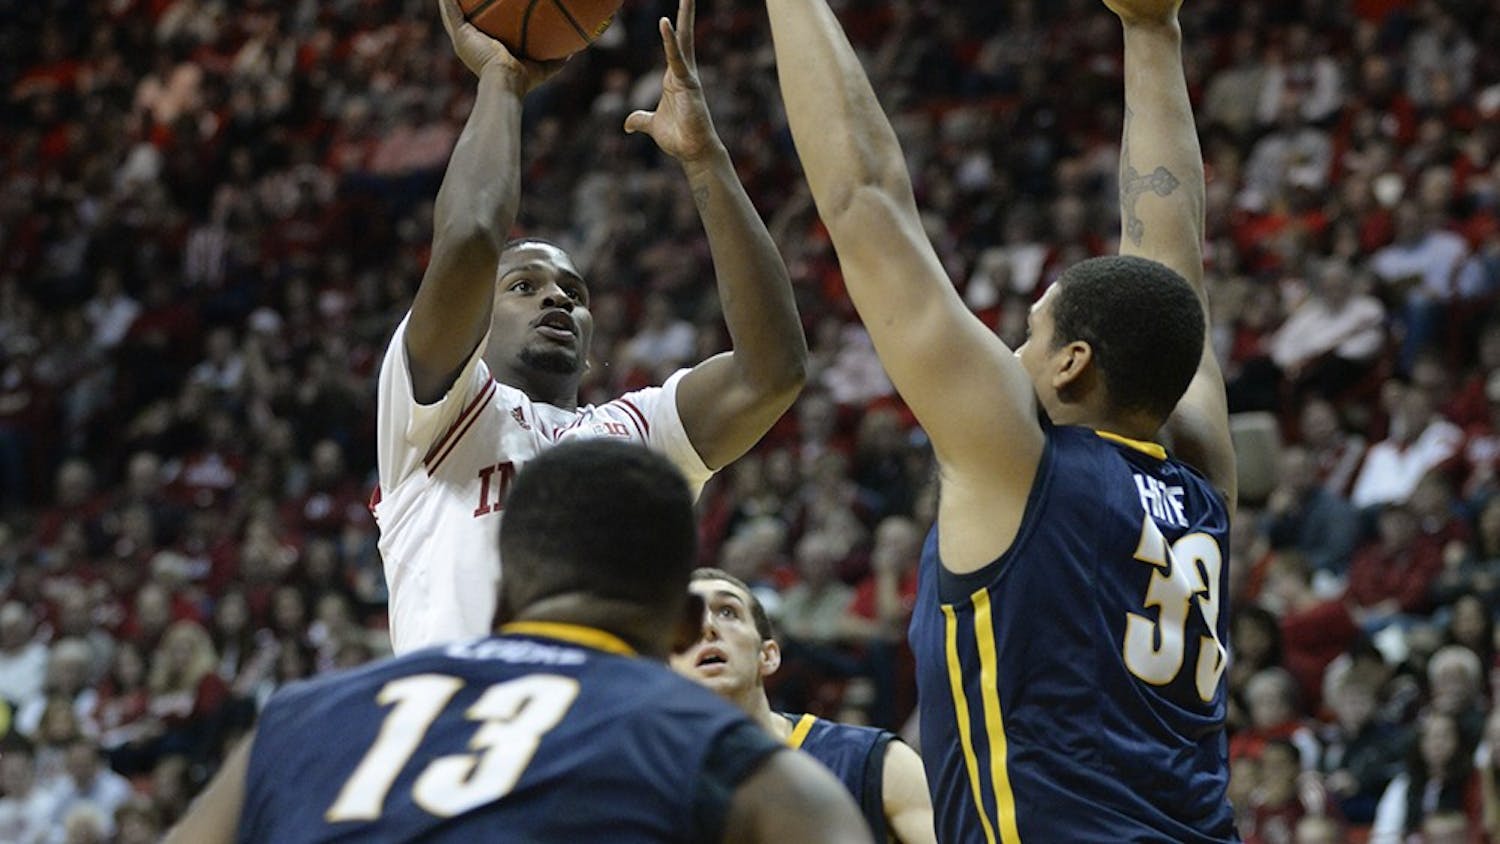 Sophomore guard Stan Robinson goes for two during IU's game against North Carolina-Greensboro on Friday at Assembly Hall.